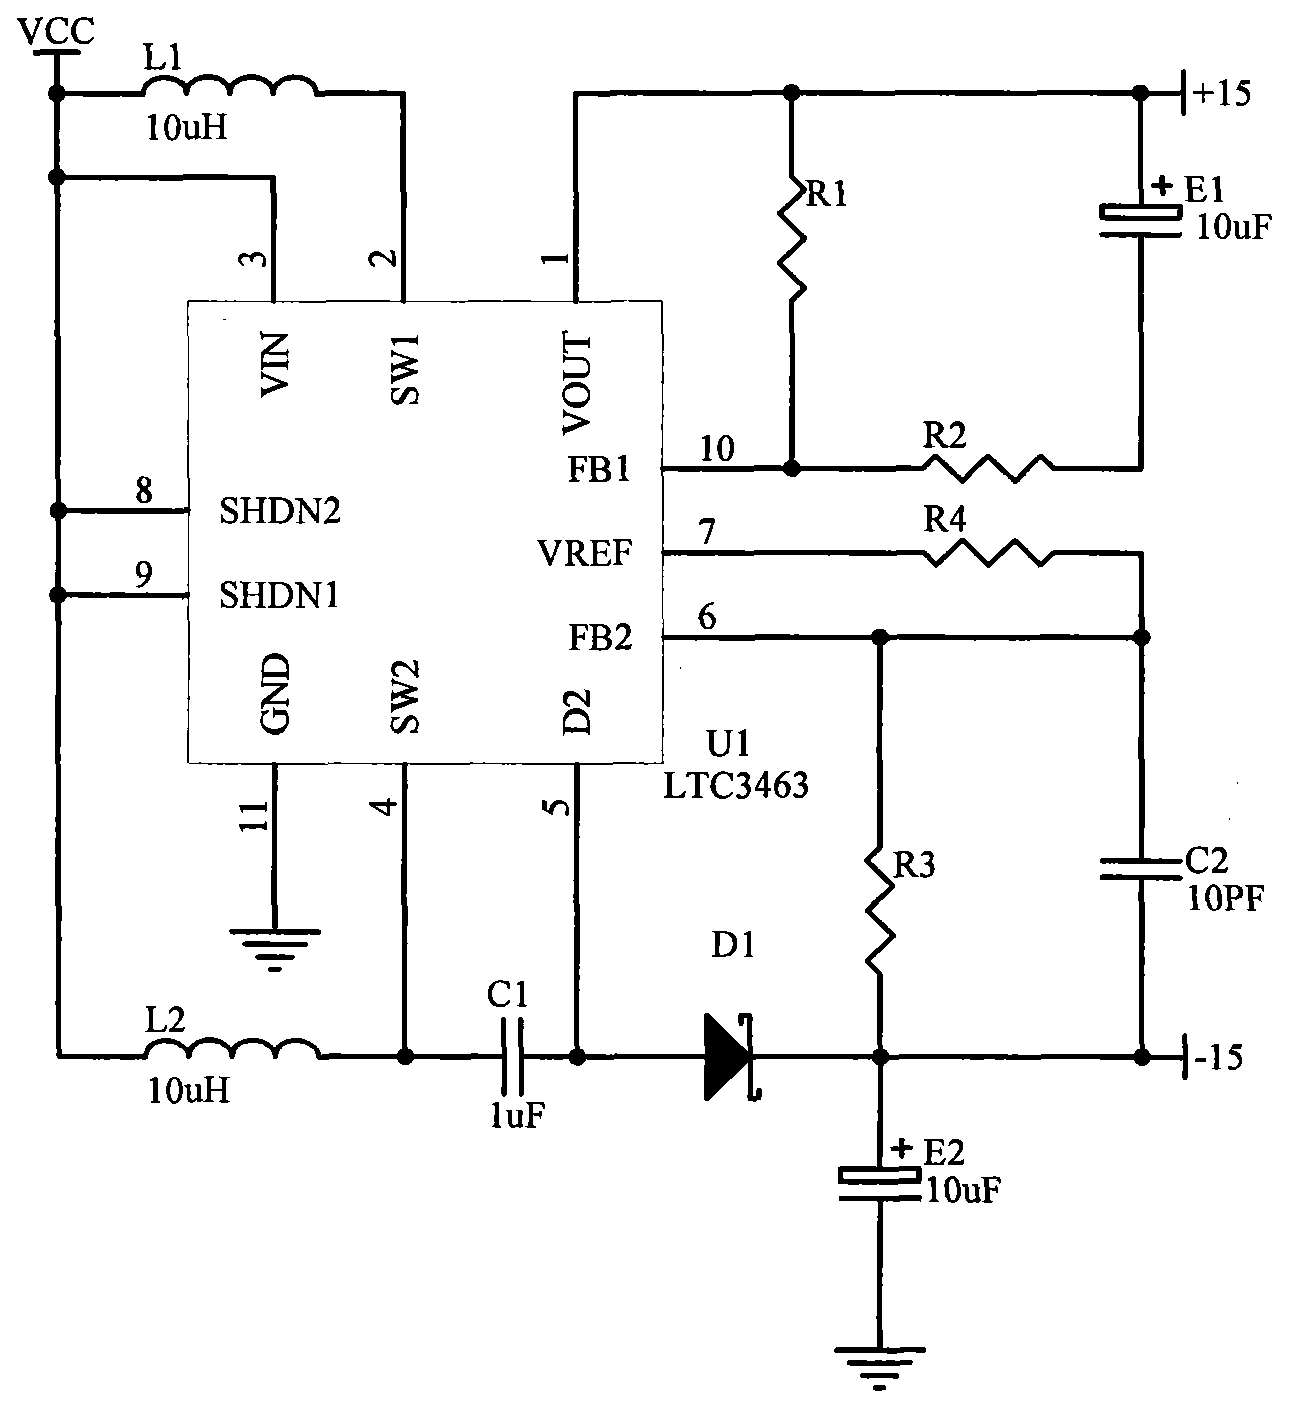 Redundant serial communication device with automatic replacing function